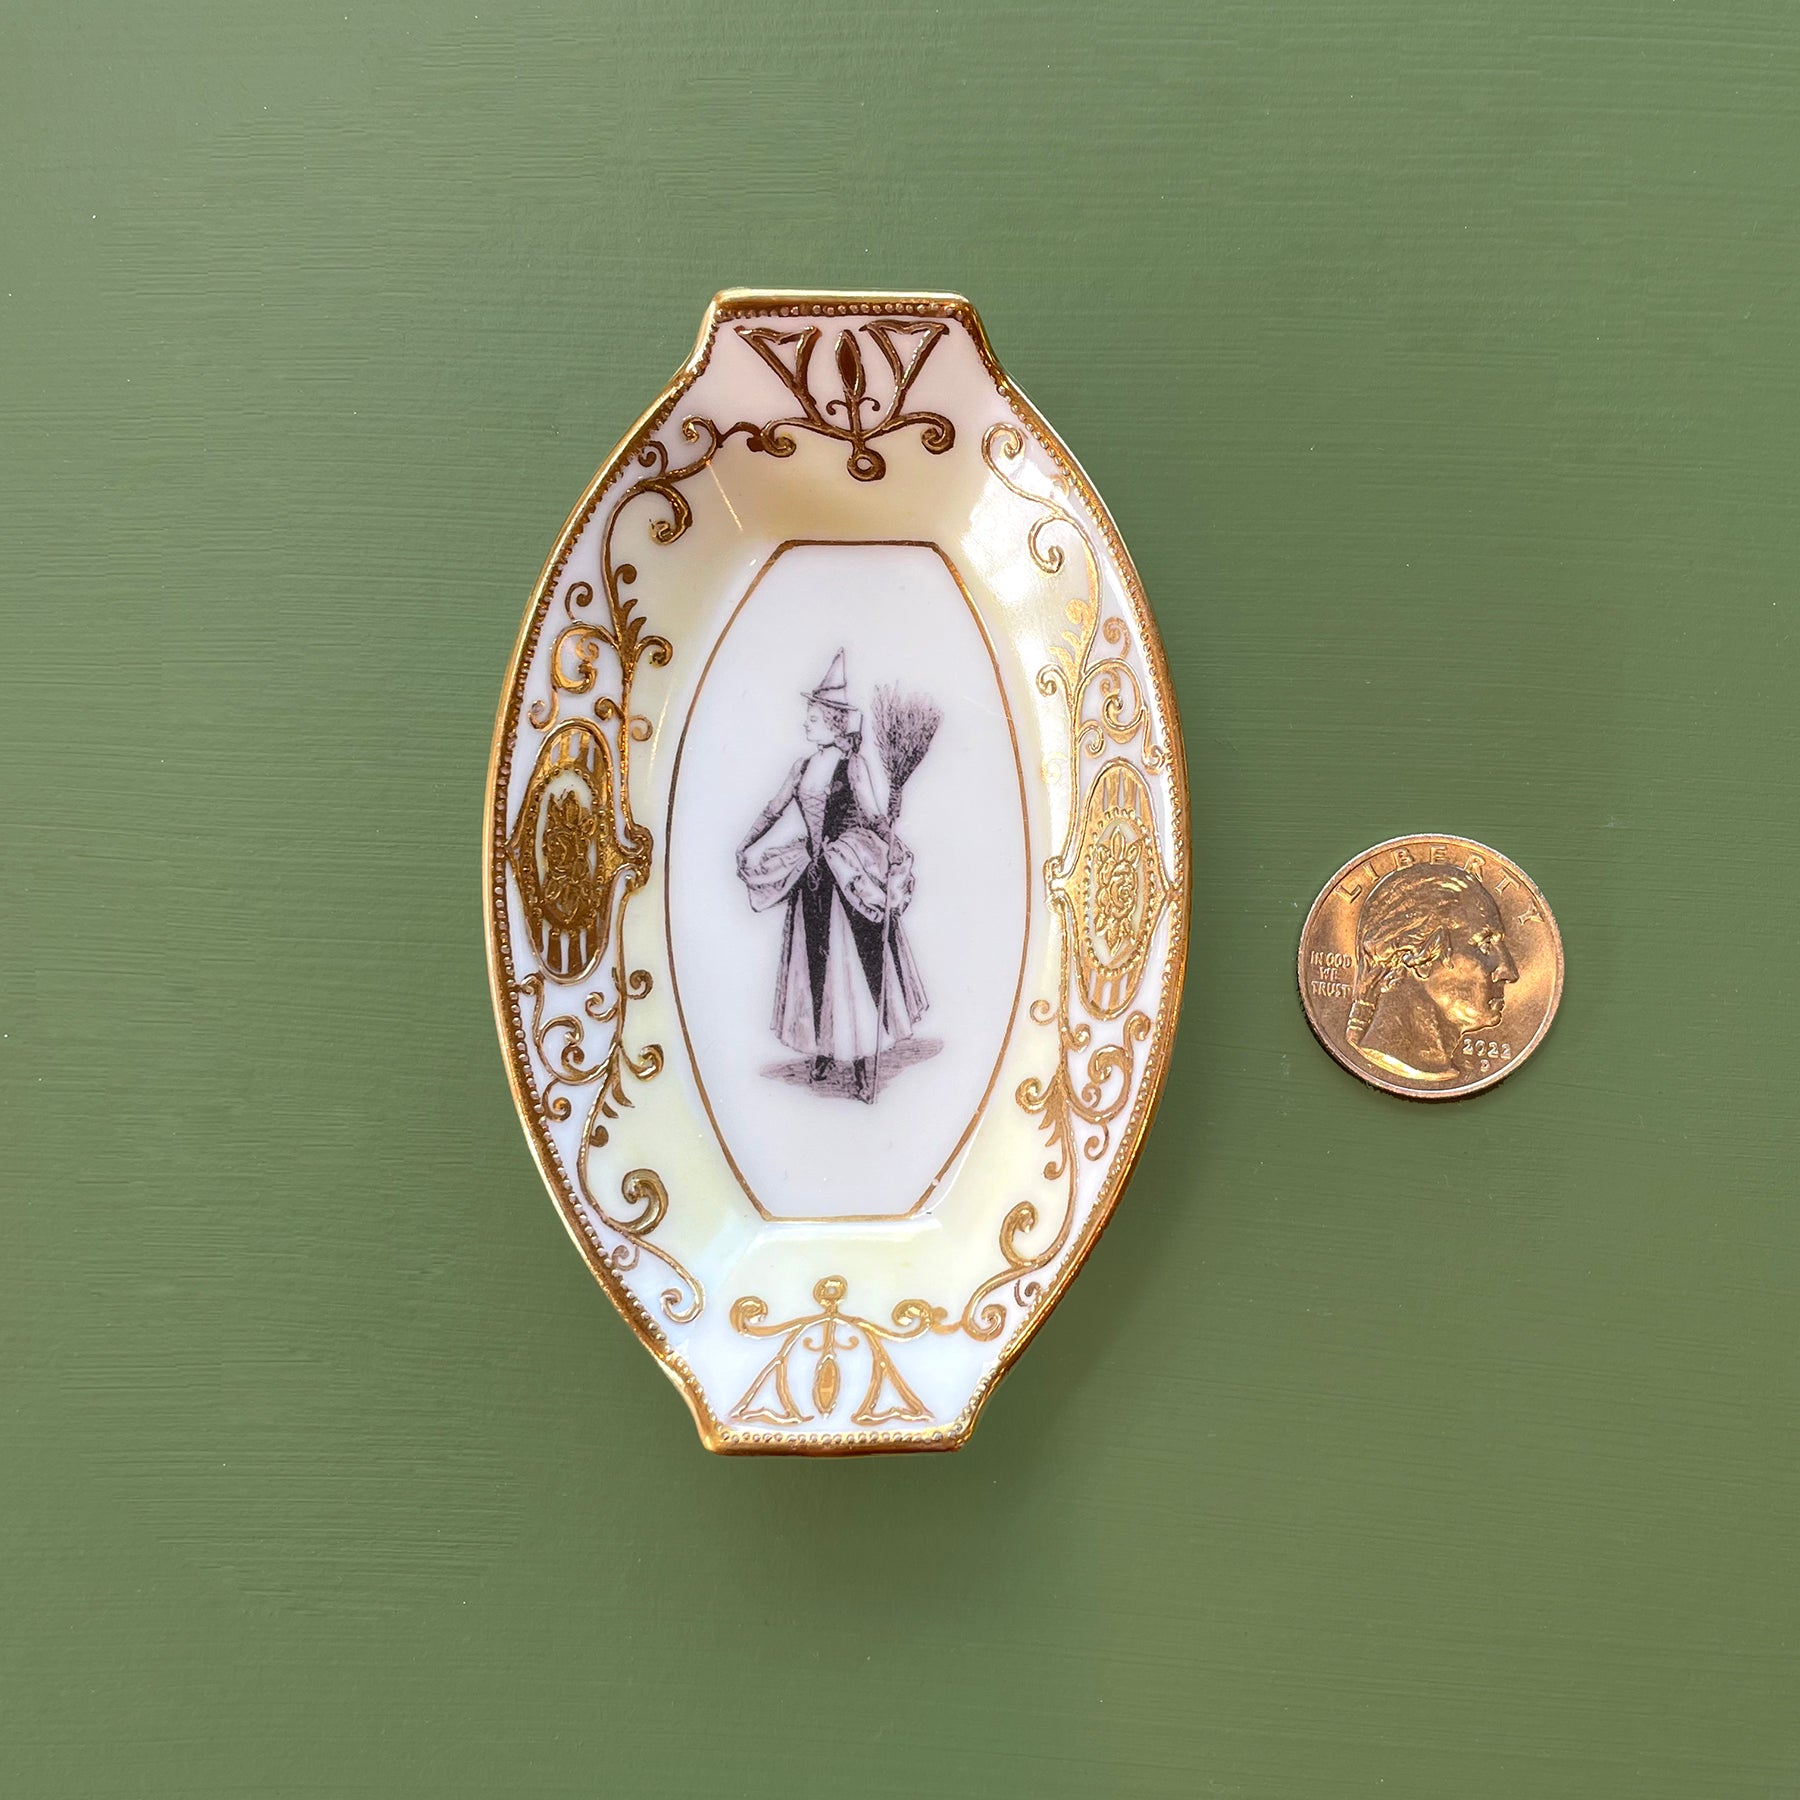 TINY Vintage Jewelry Tray - The Witch.